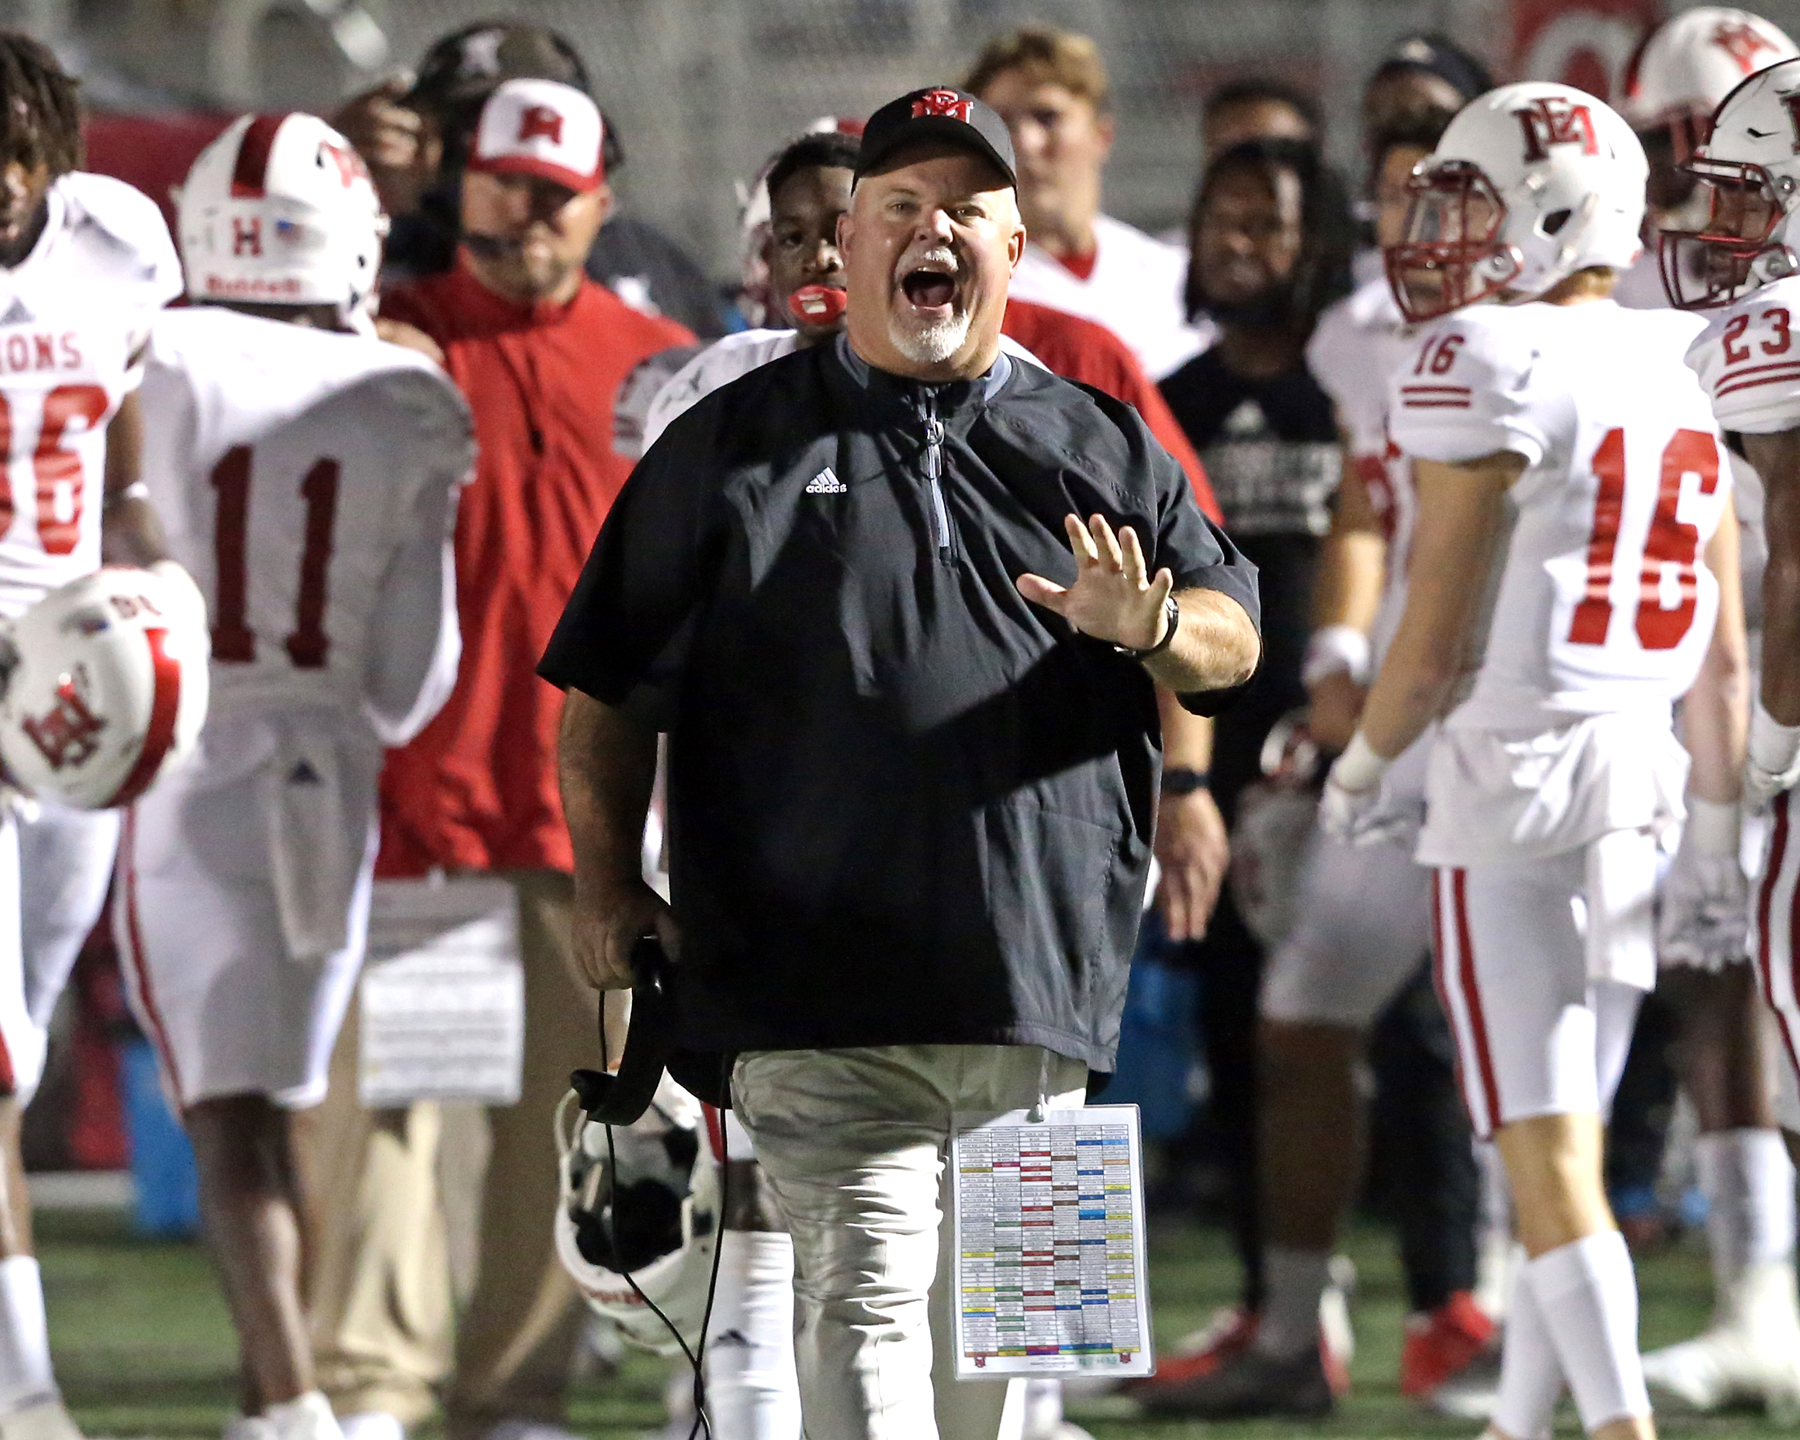 EMCC Football Schedule brings back memories for Stephens The Dispatch